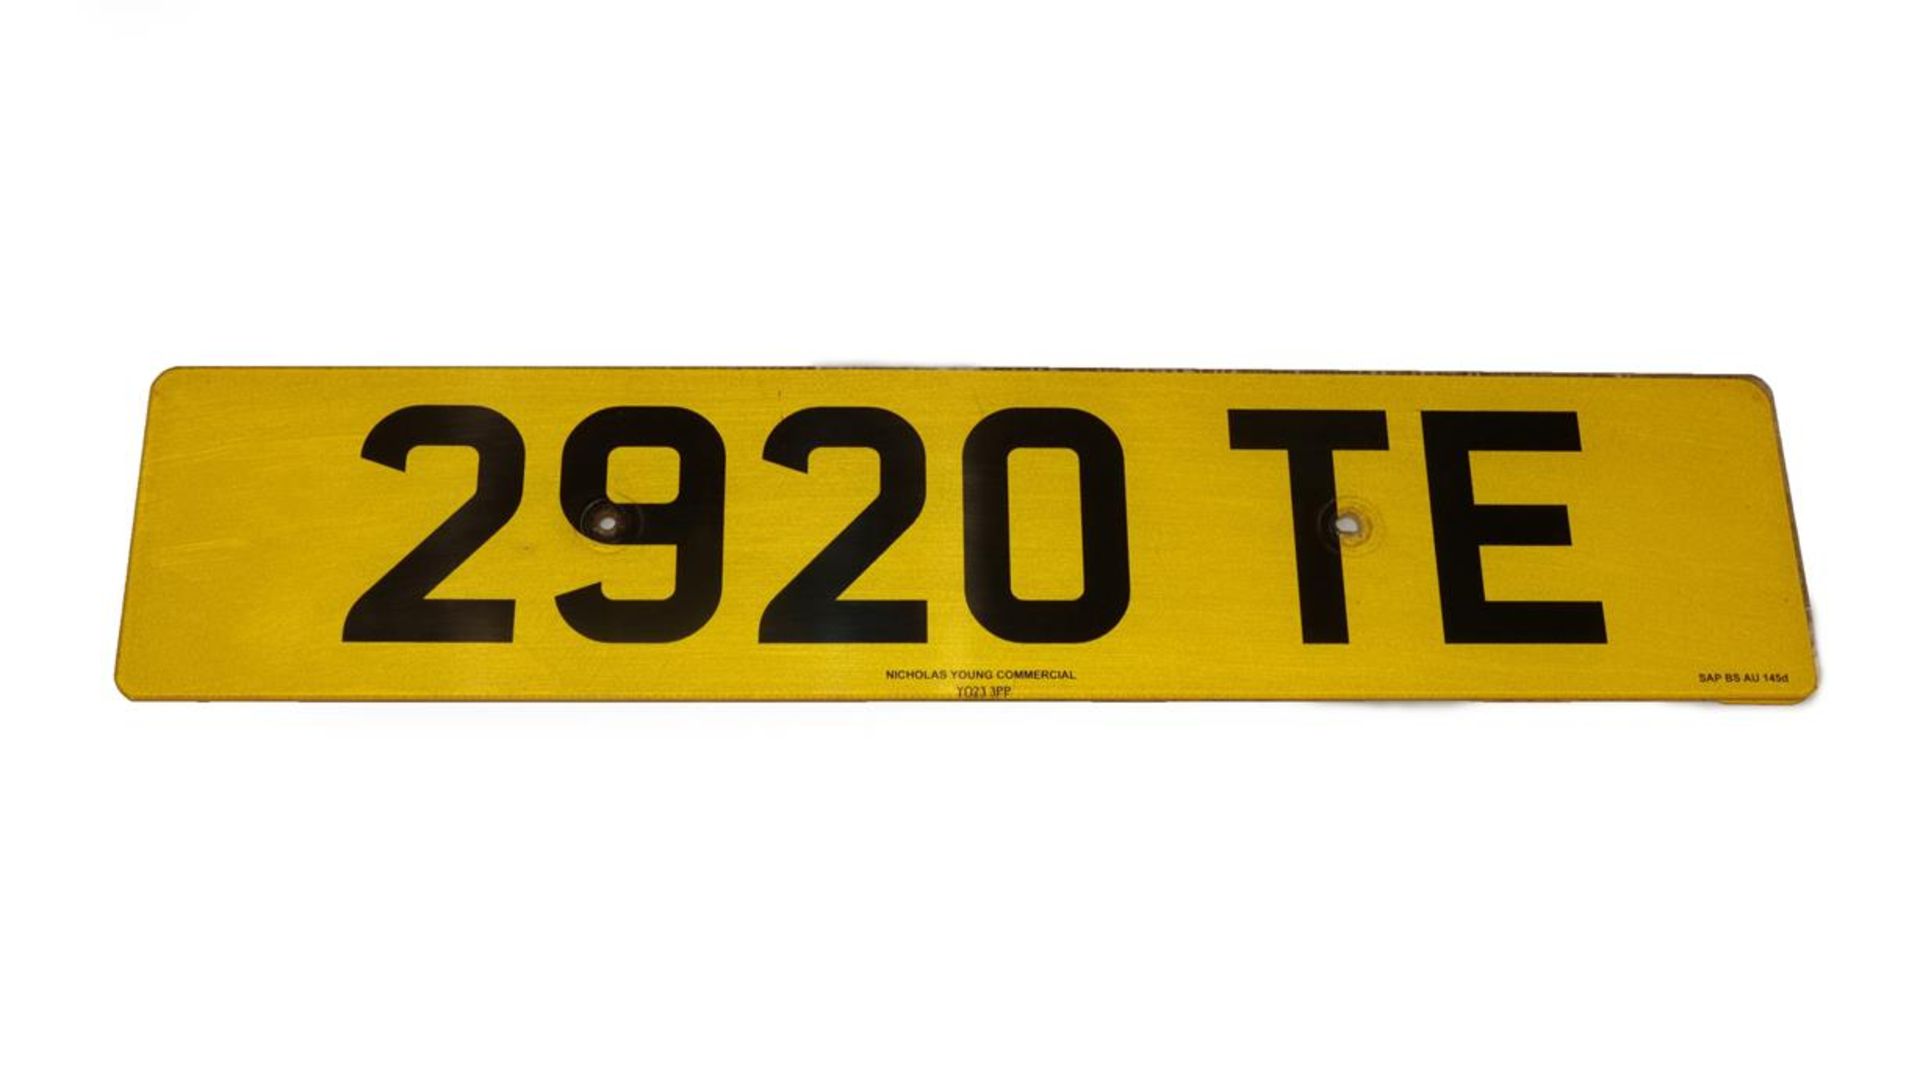 Cherished Registration Number: 2920 TE, with retention certificate, expires 27 06 2025 sold with one